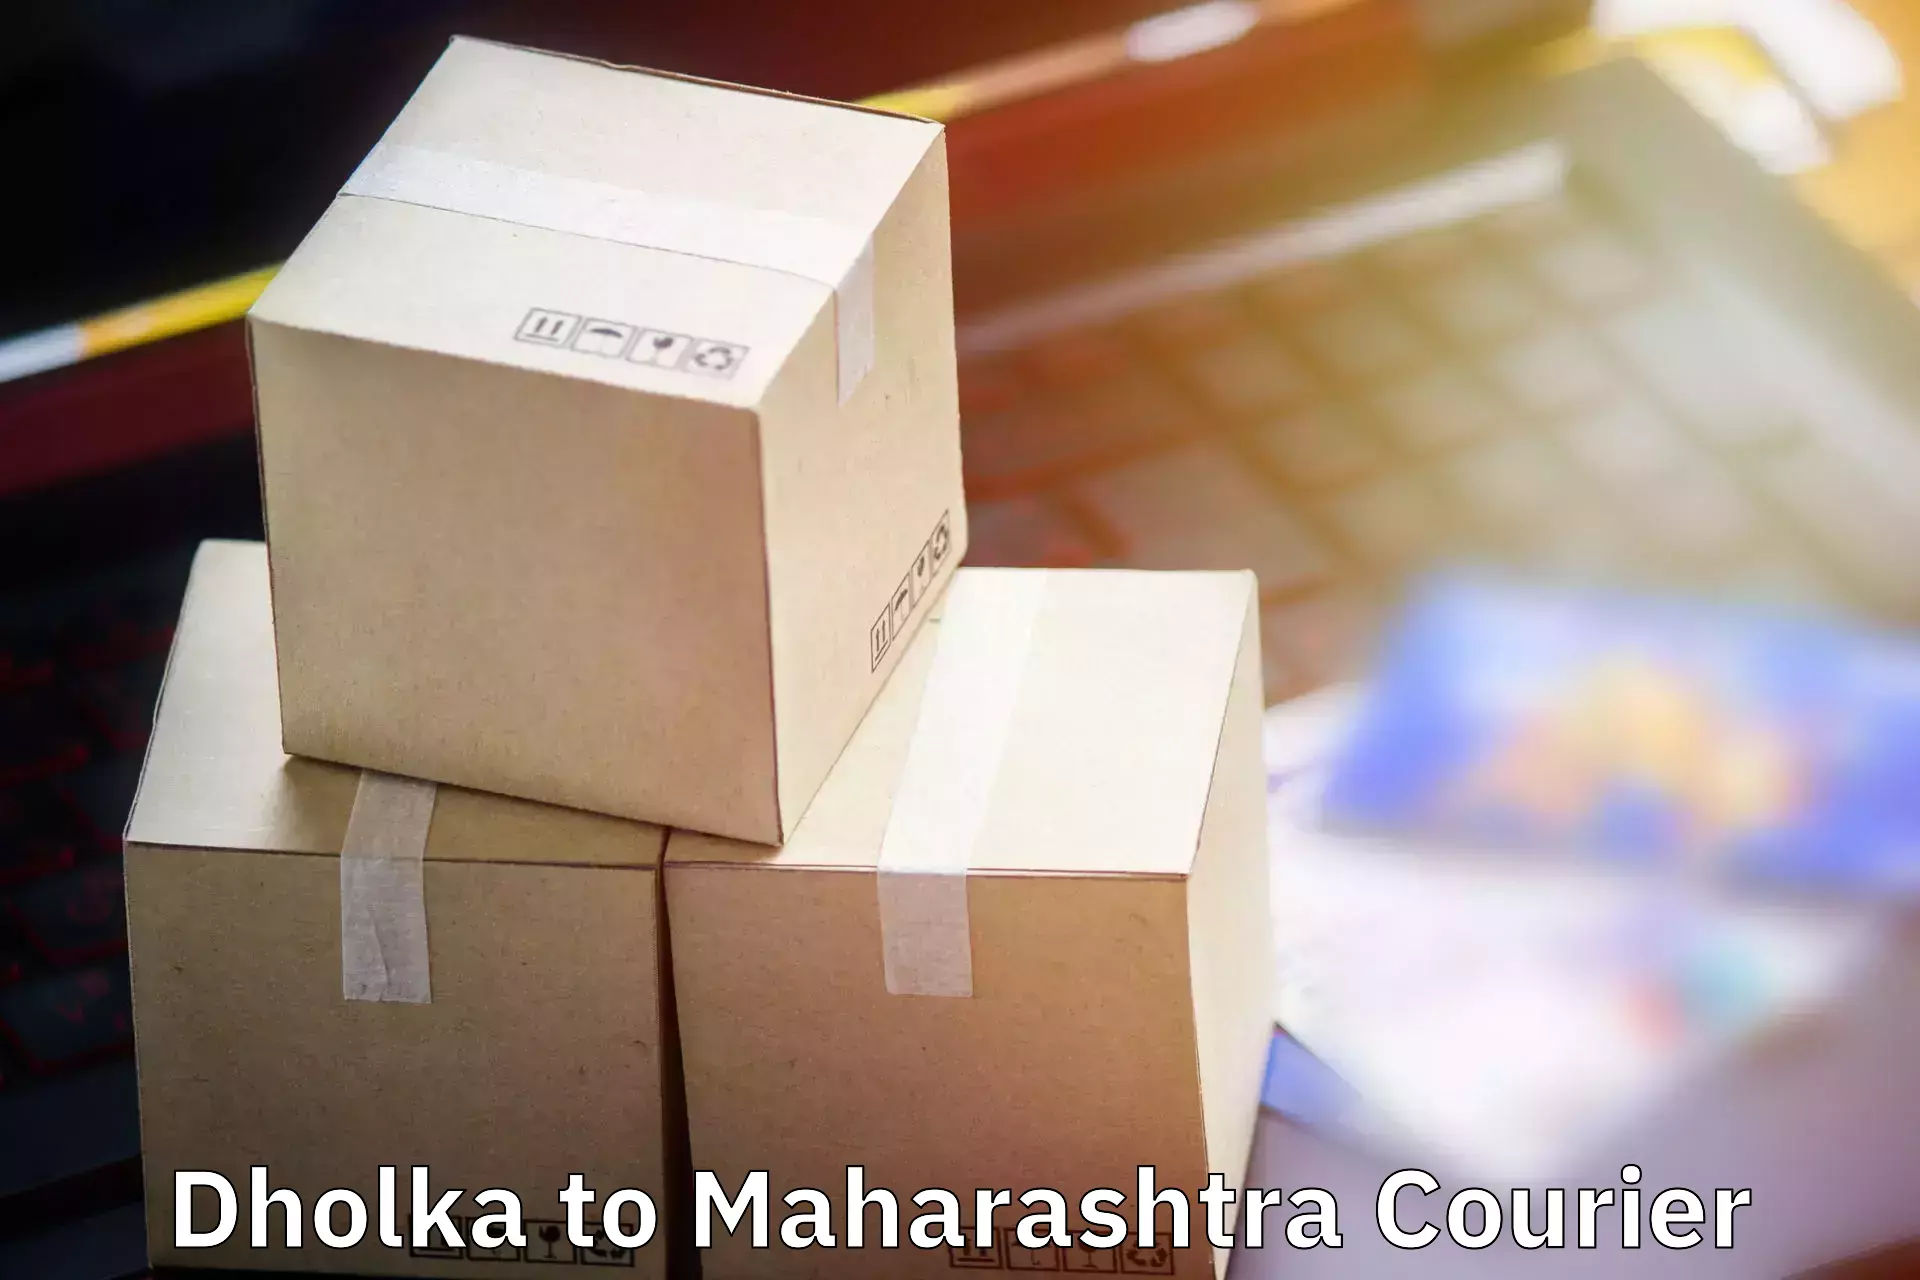 Luggage shipping consultation Dholka to Lonar